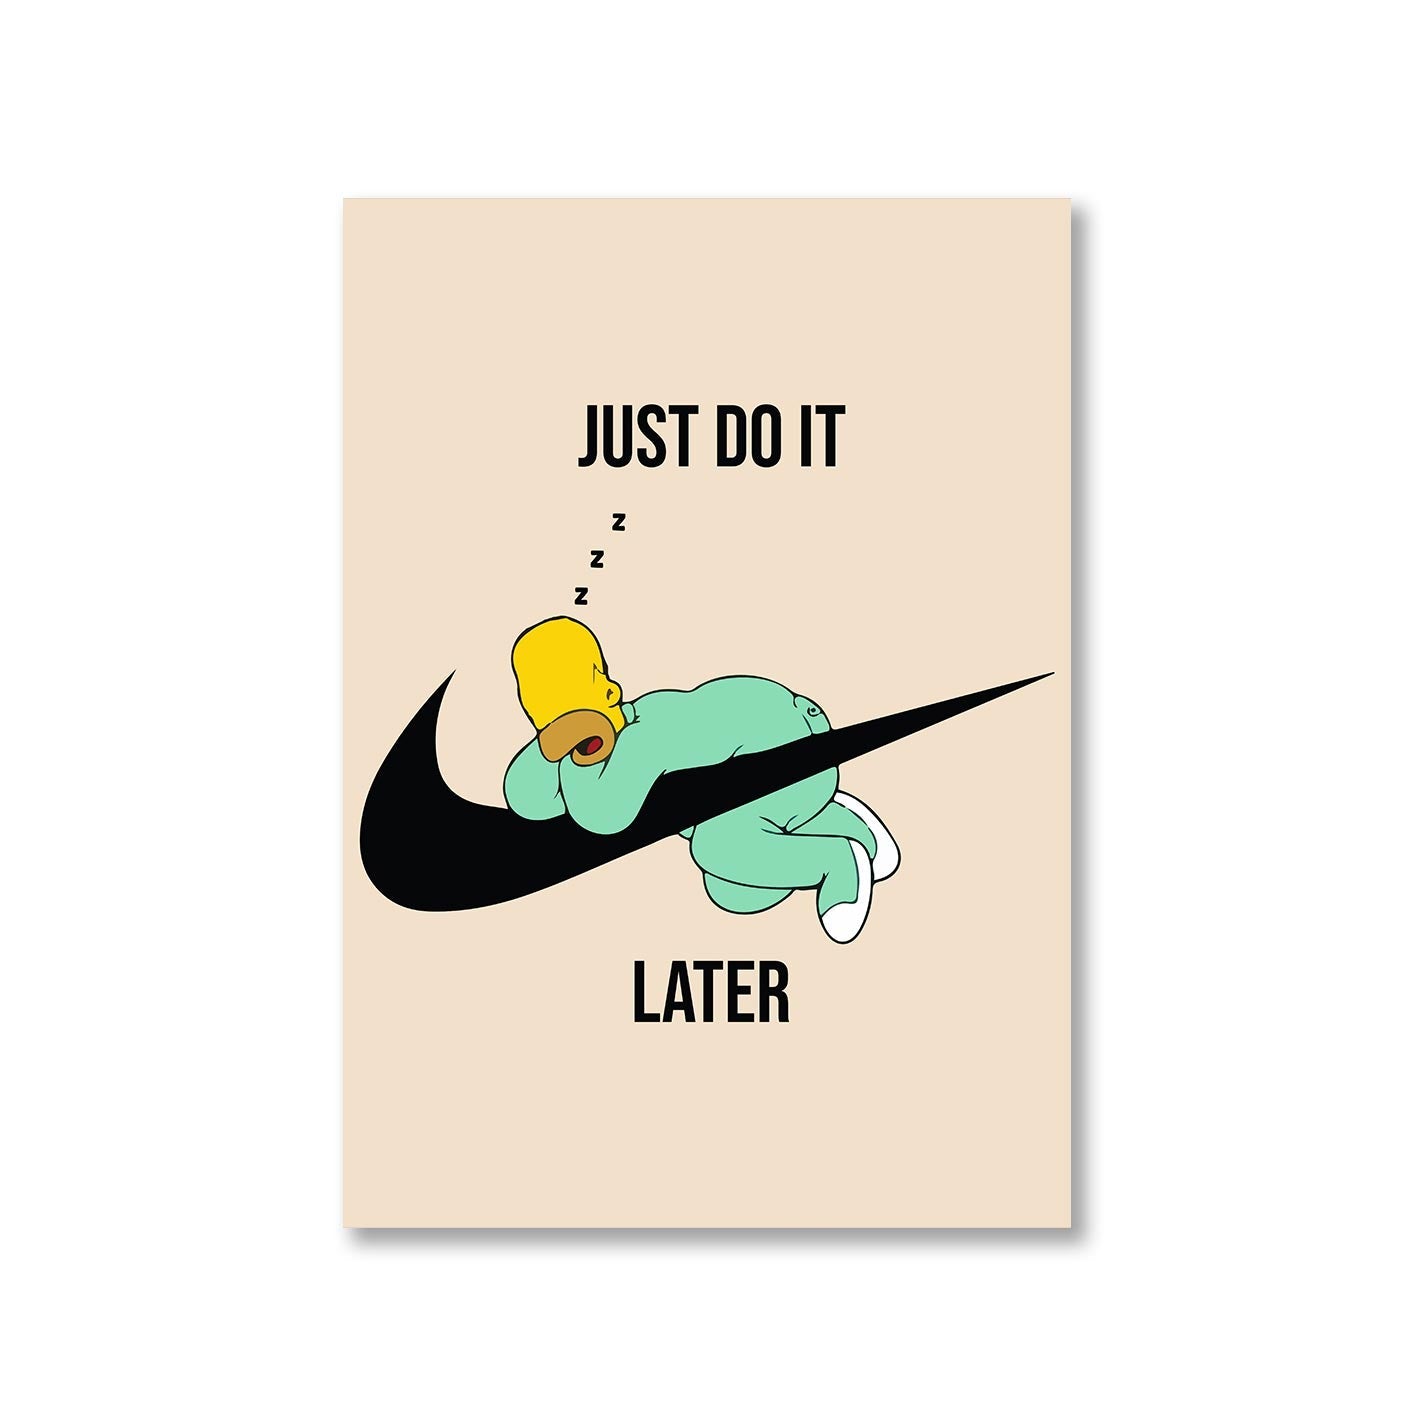 the simpsons just do it later poster wall art buy online united states of america usa the banyan tee tbt a4 - homer simpson